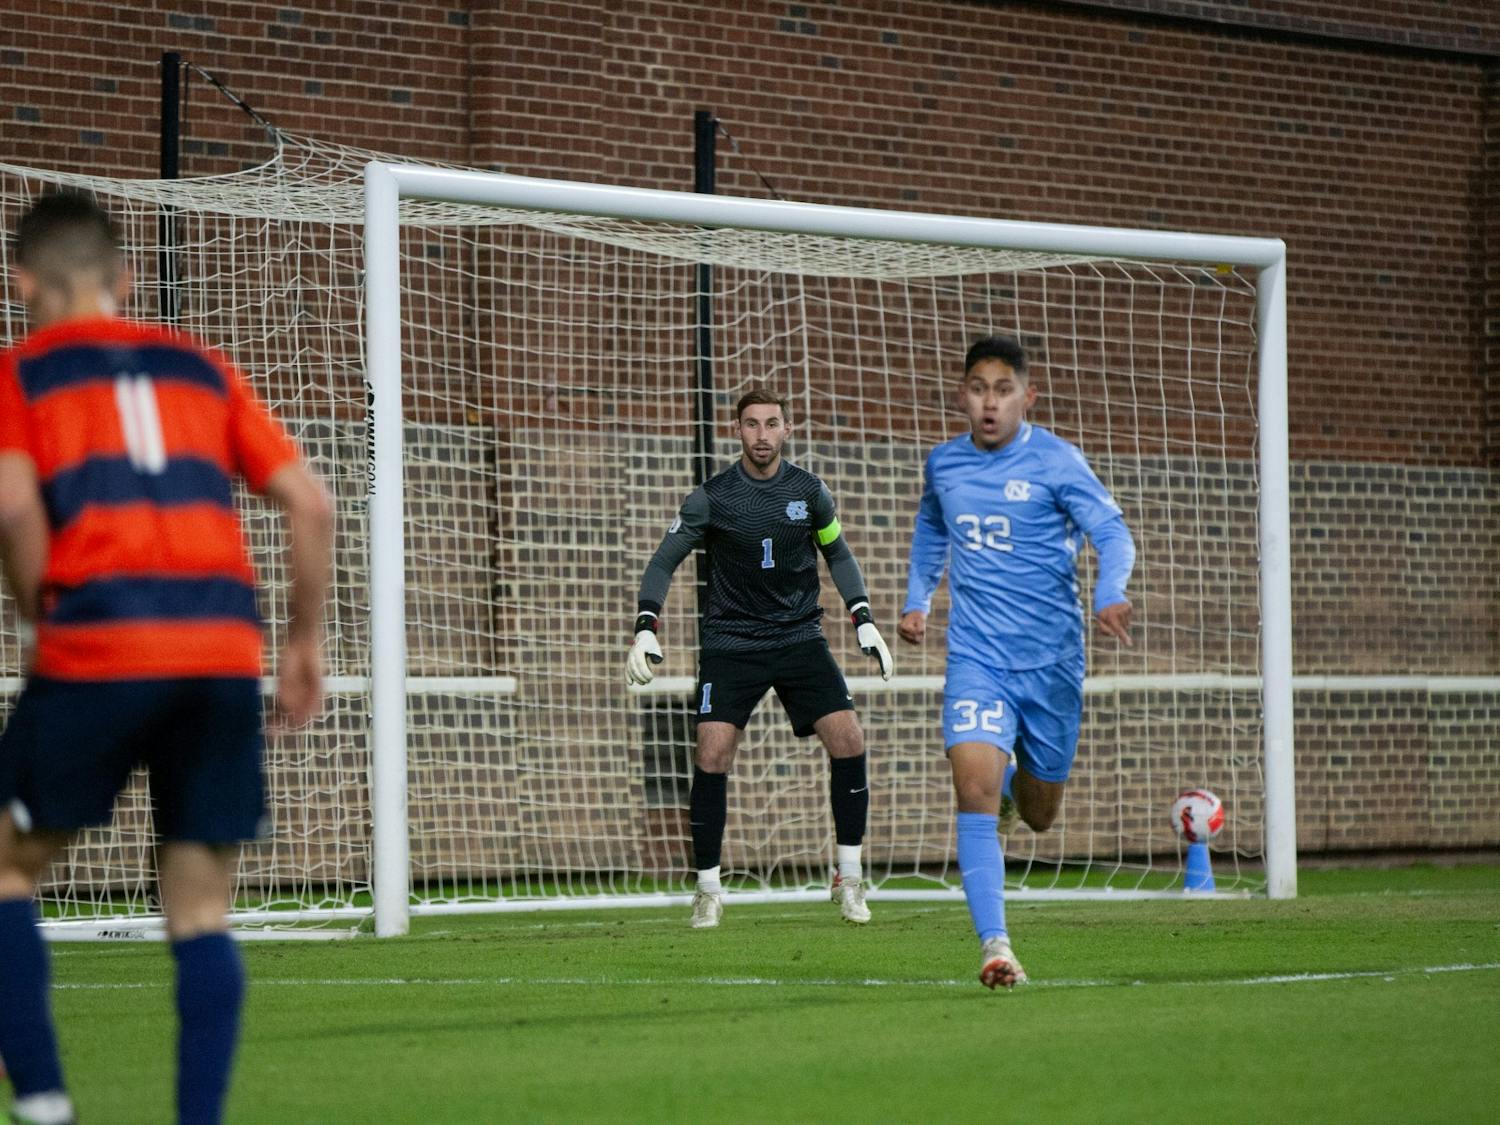 UNC graduate goal keeper Alec Smir (1) prepares to catch the ball at the first round of the ACC men's soccer tournament against Syracuse on Nov. 3 at Dorrance field. UNC won 1-0 in the second overtime.